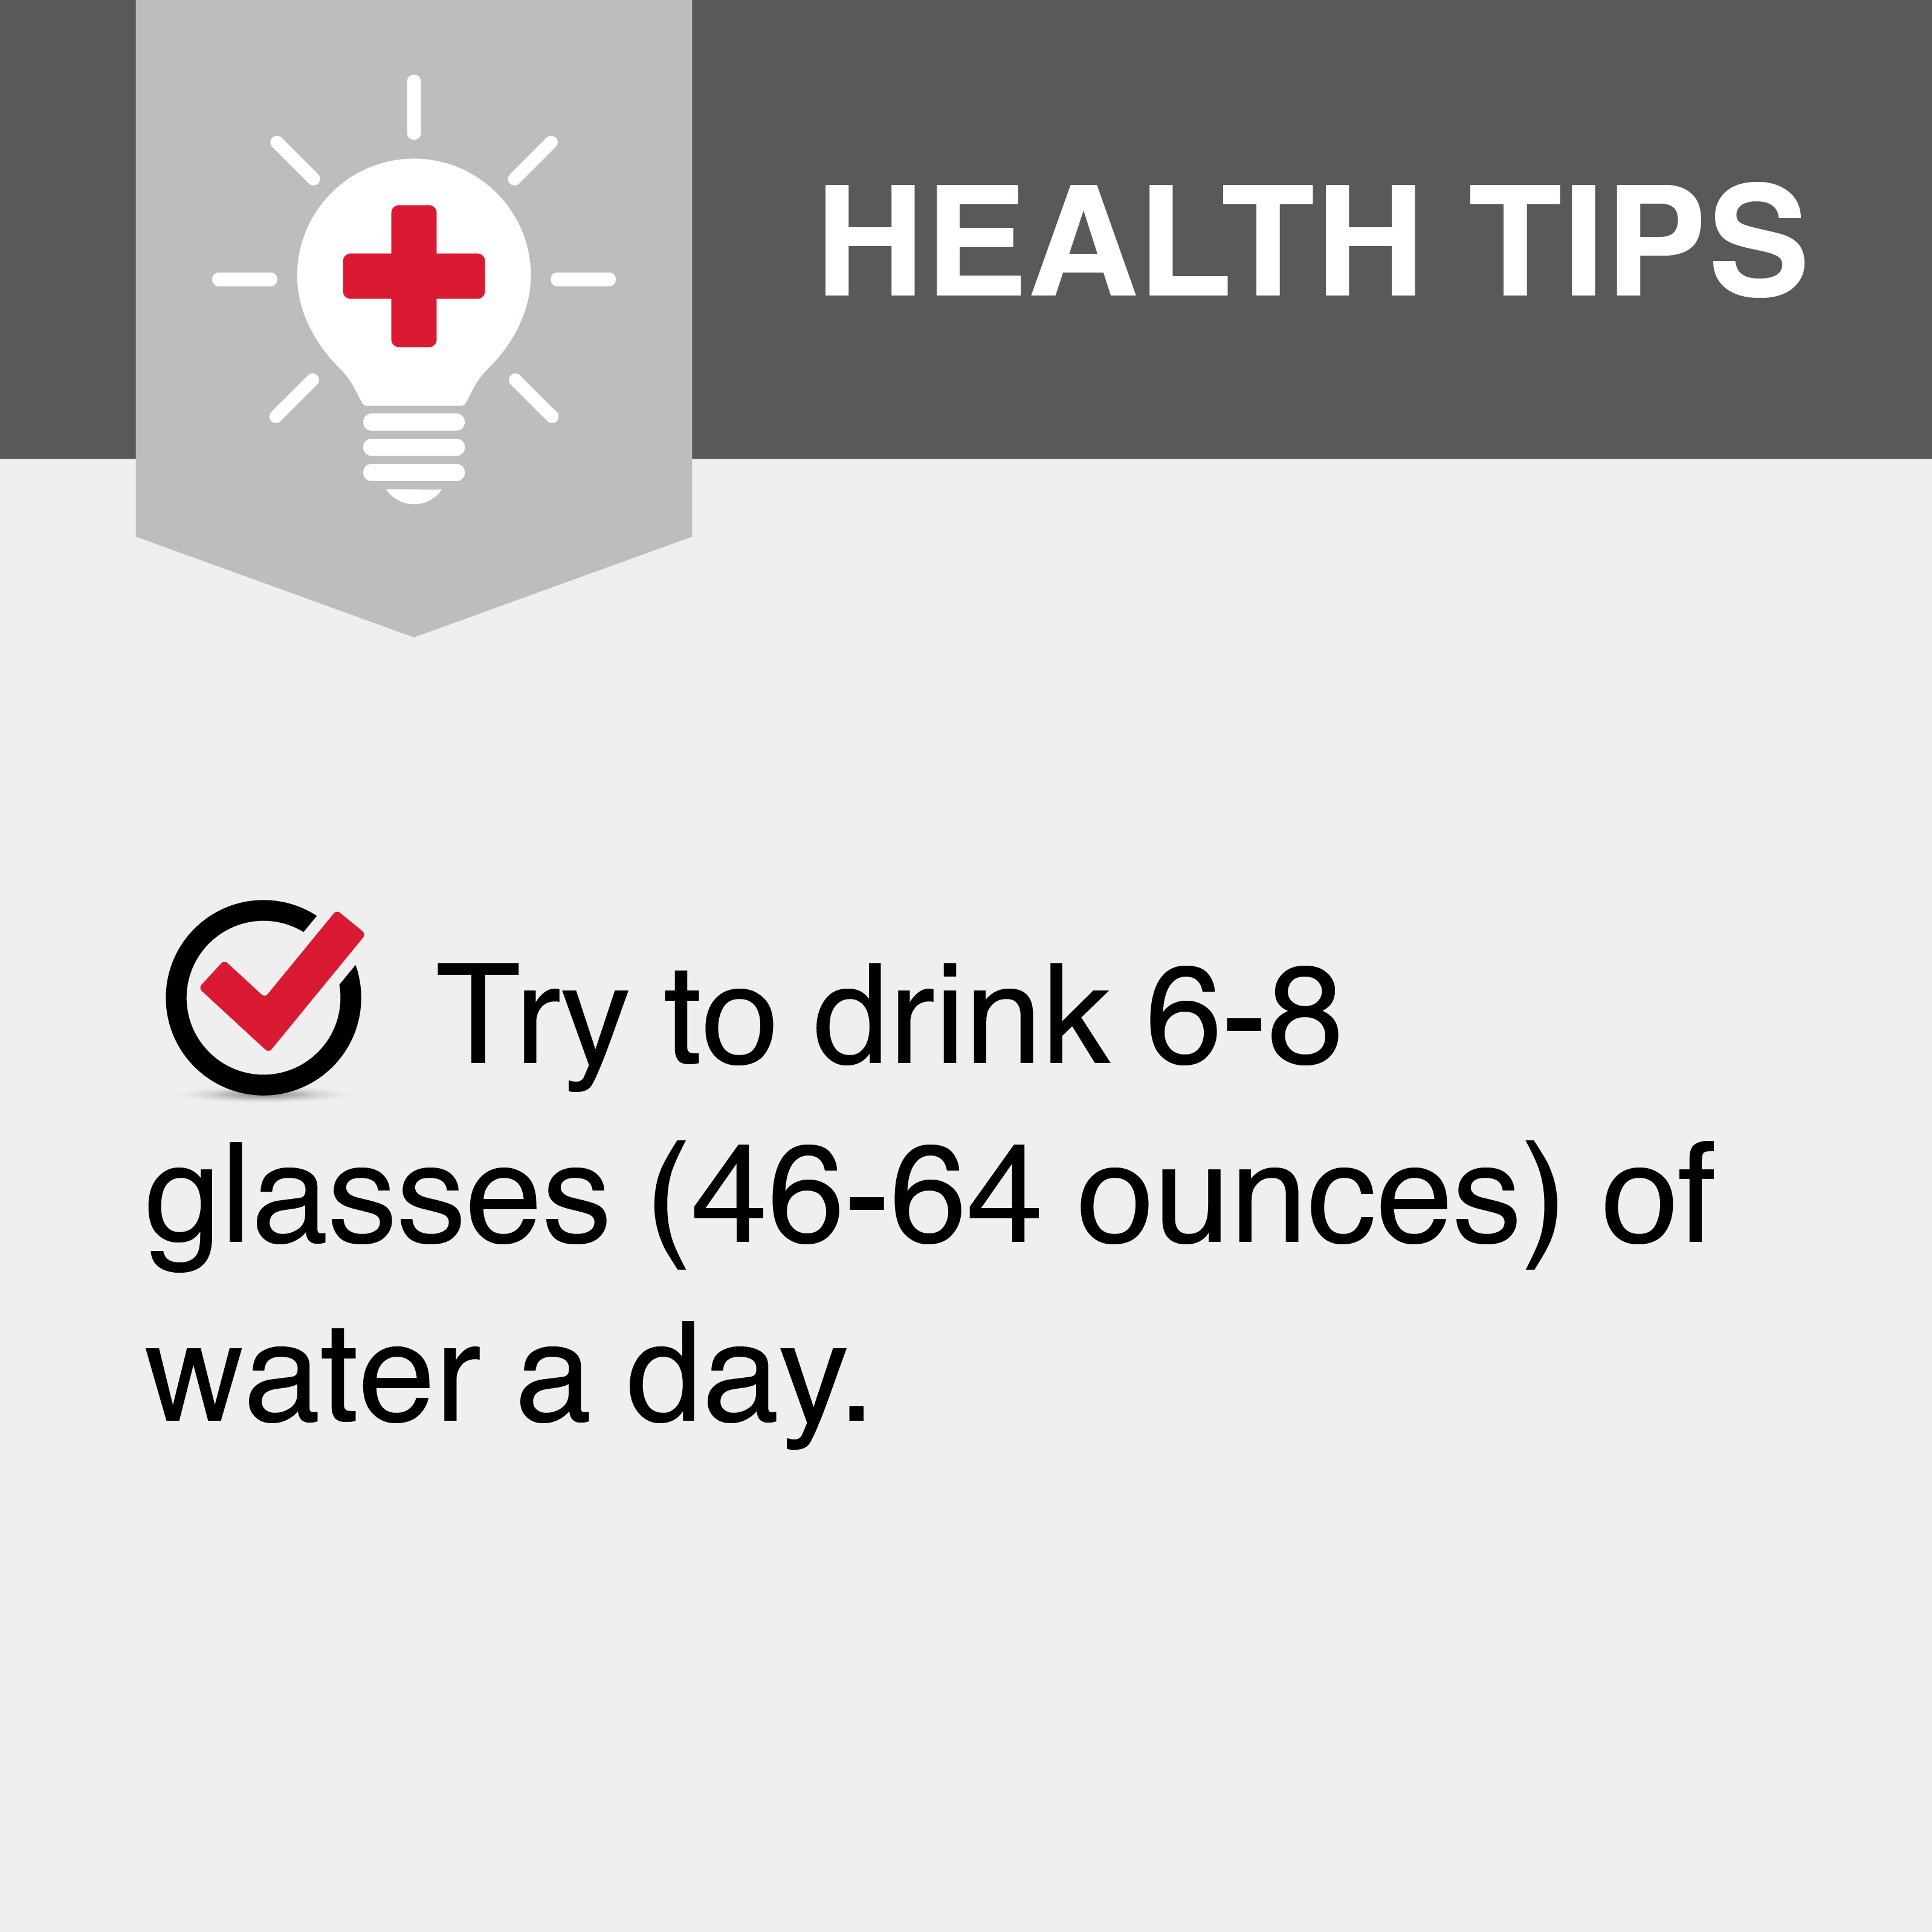 Try to drink 6-8 glasses (46-64 ounces) of water a day.